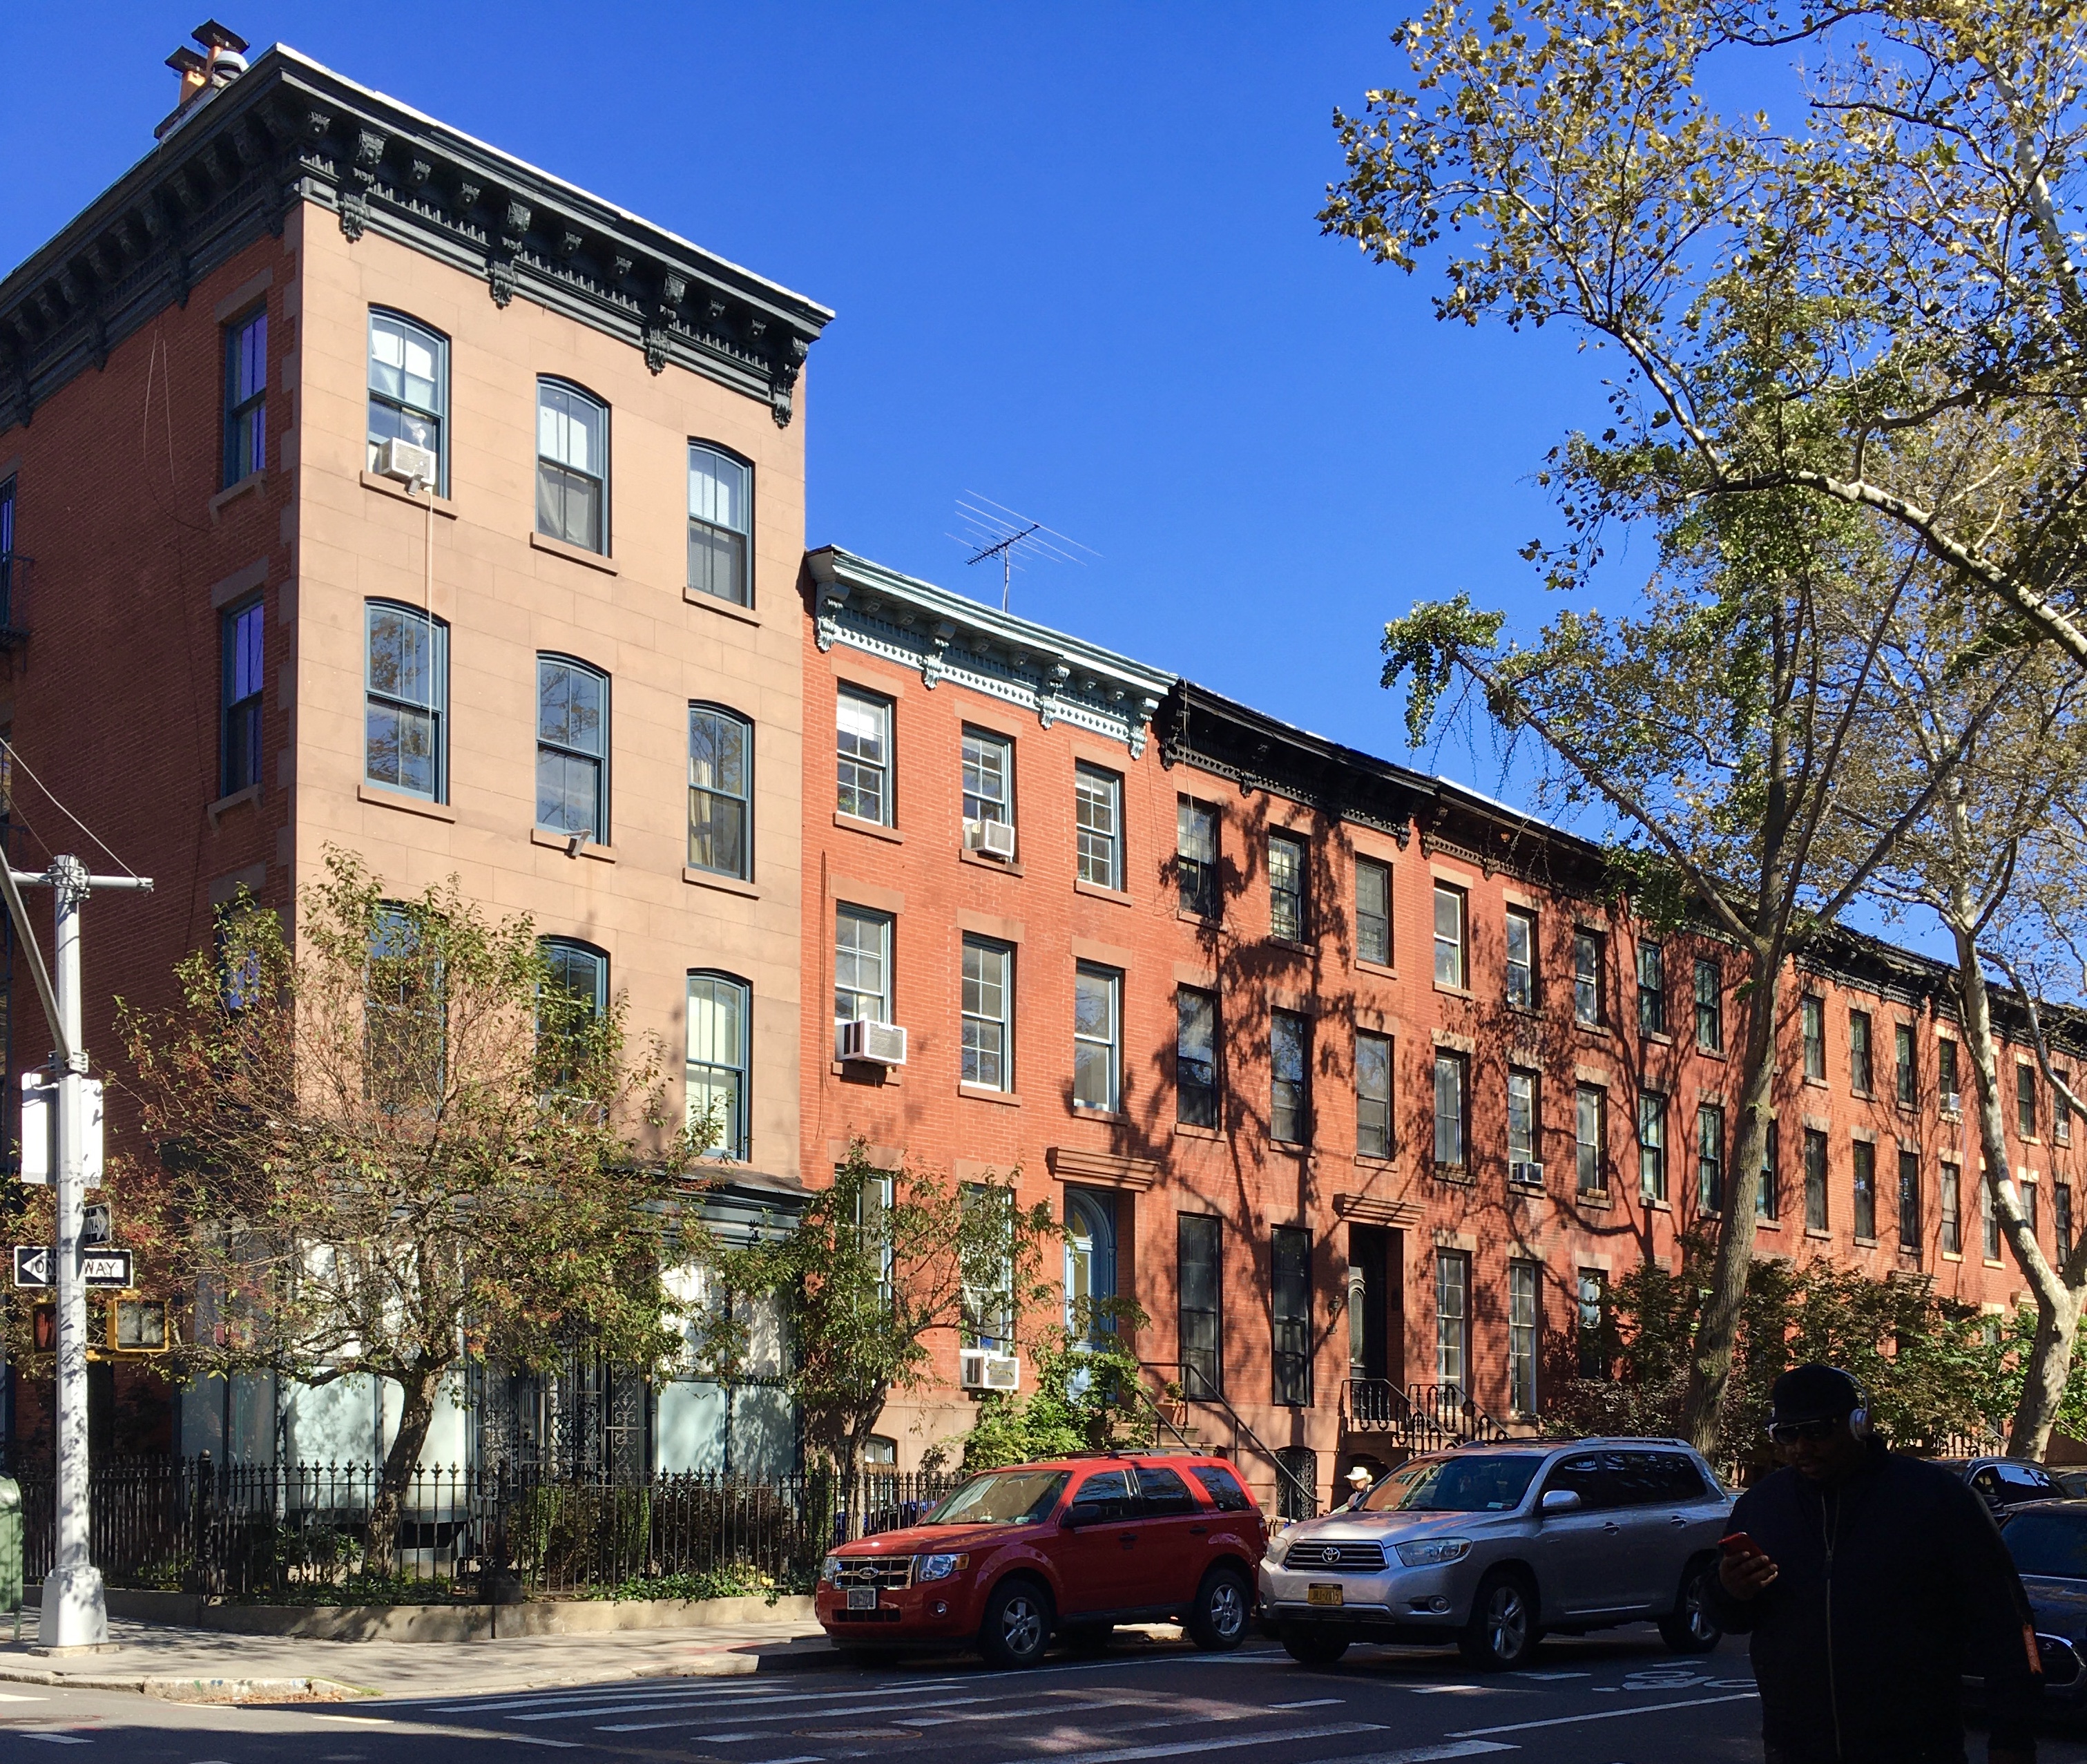 Trees cast shadows on 133 Bergen St. (at left) and other houses on this lovely landmarked Boerum Hill block. Eagle photo by Lore Croghan